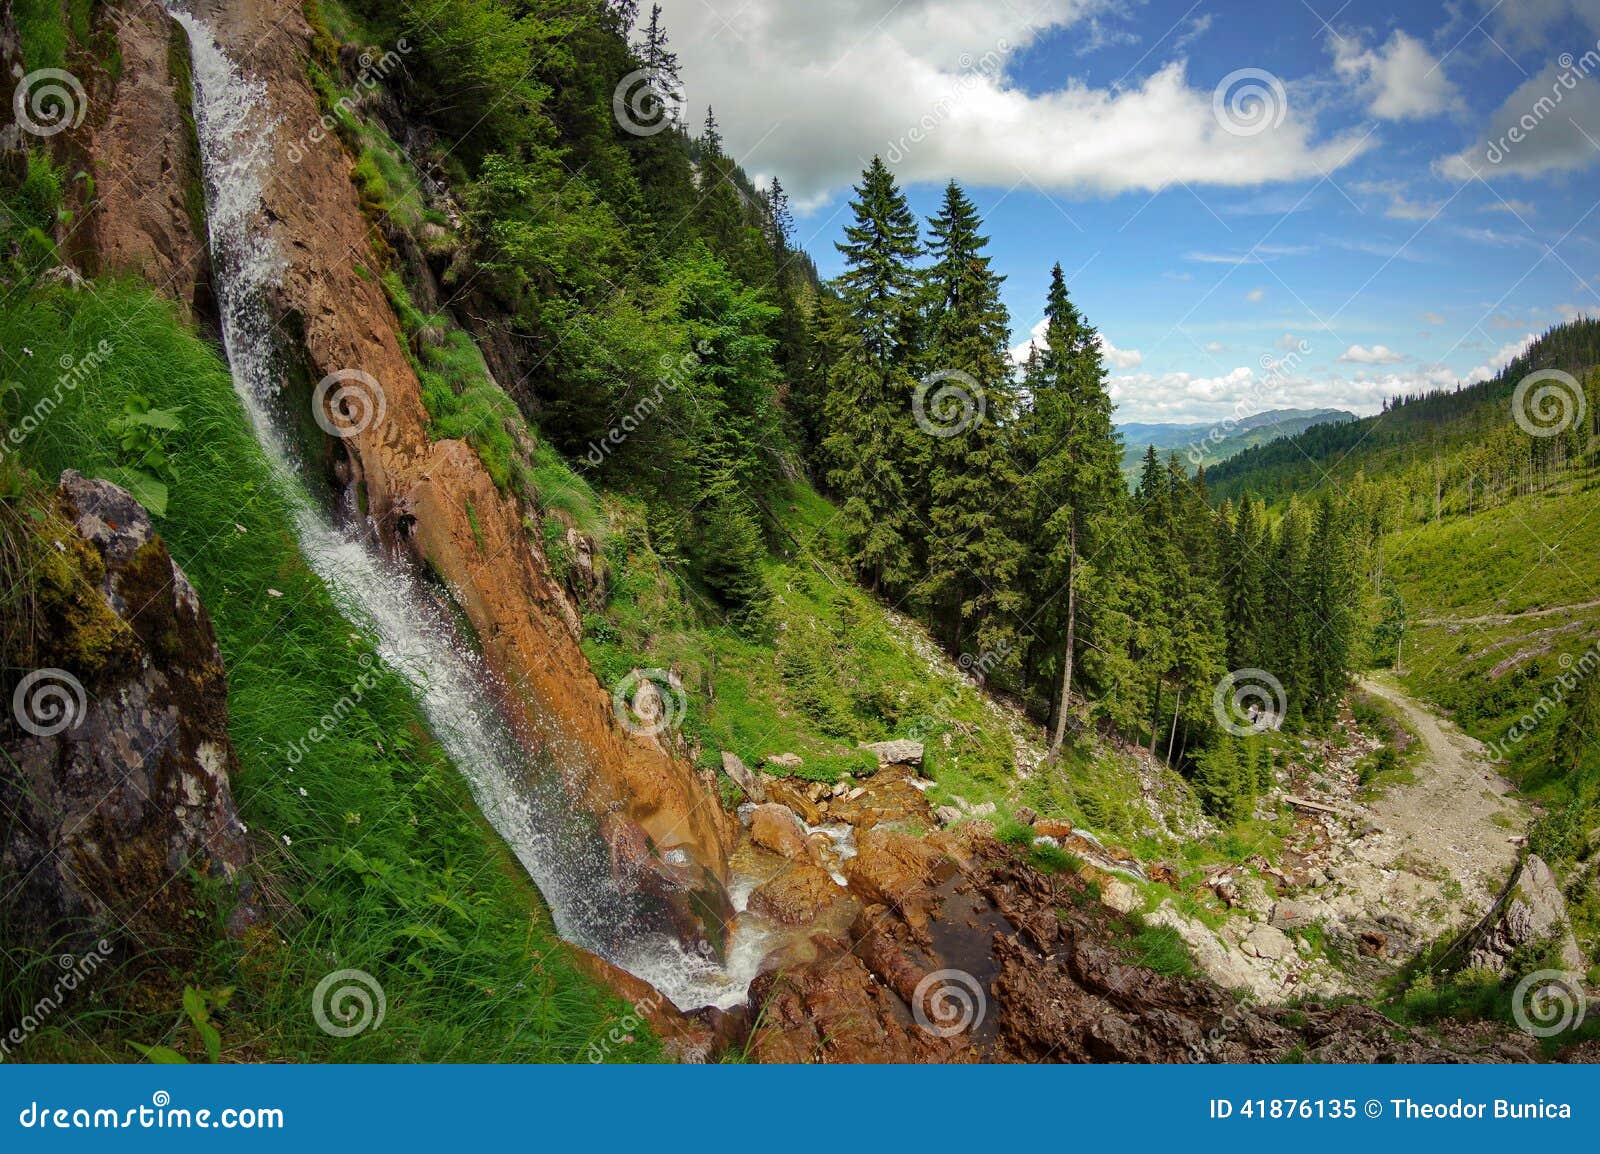 summer landscape with cascada cailor (horses waterfall) in rodnei mountains, landmark attraction in romania